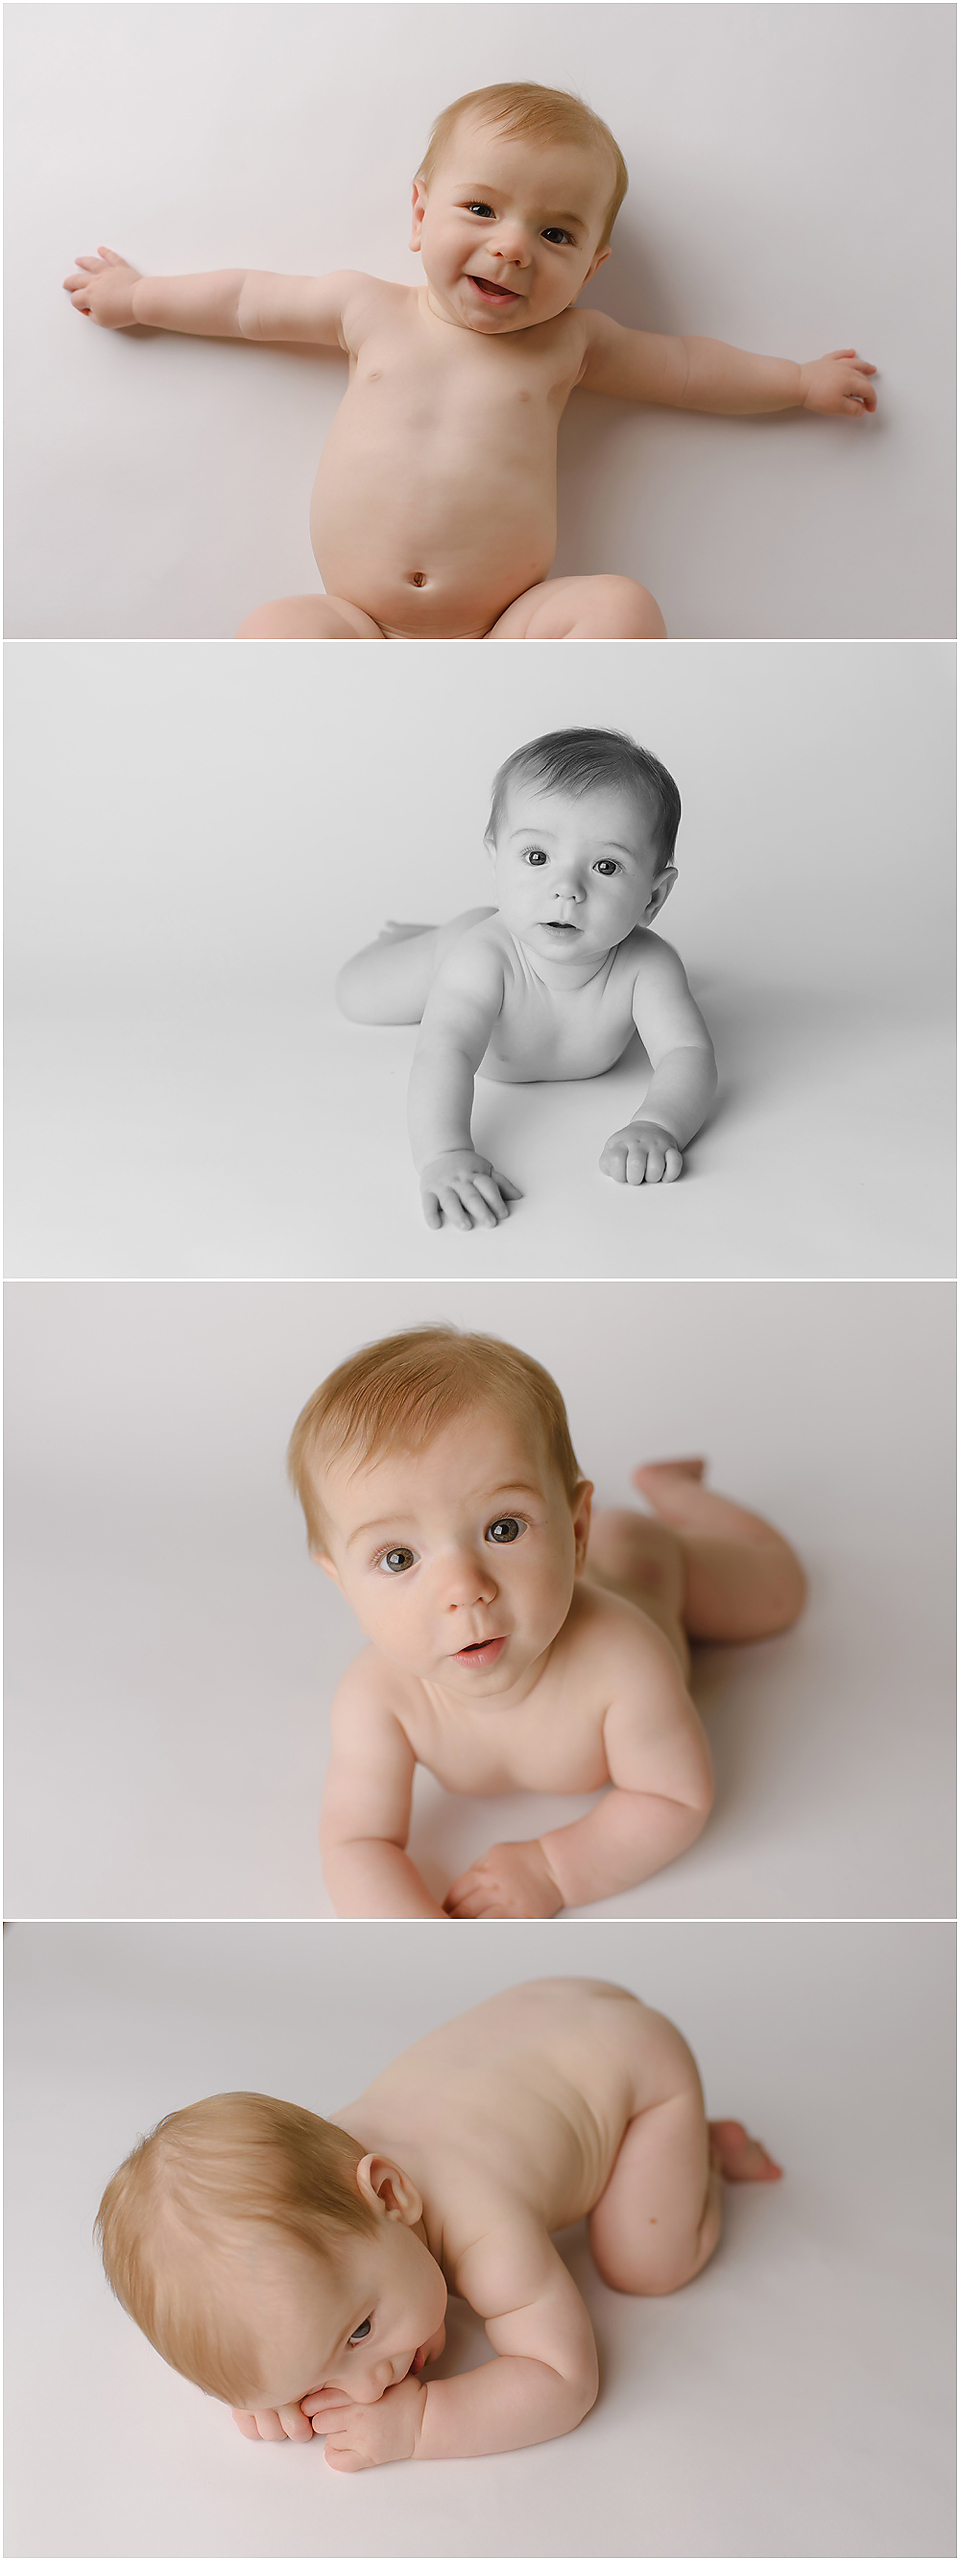 Simple and classic baby photos | Natural, light and airy baby photography | Farmington, CT Photographers | CT Portrait Studio |www.kellidease.com